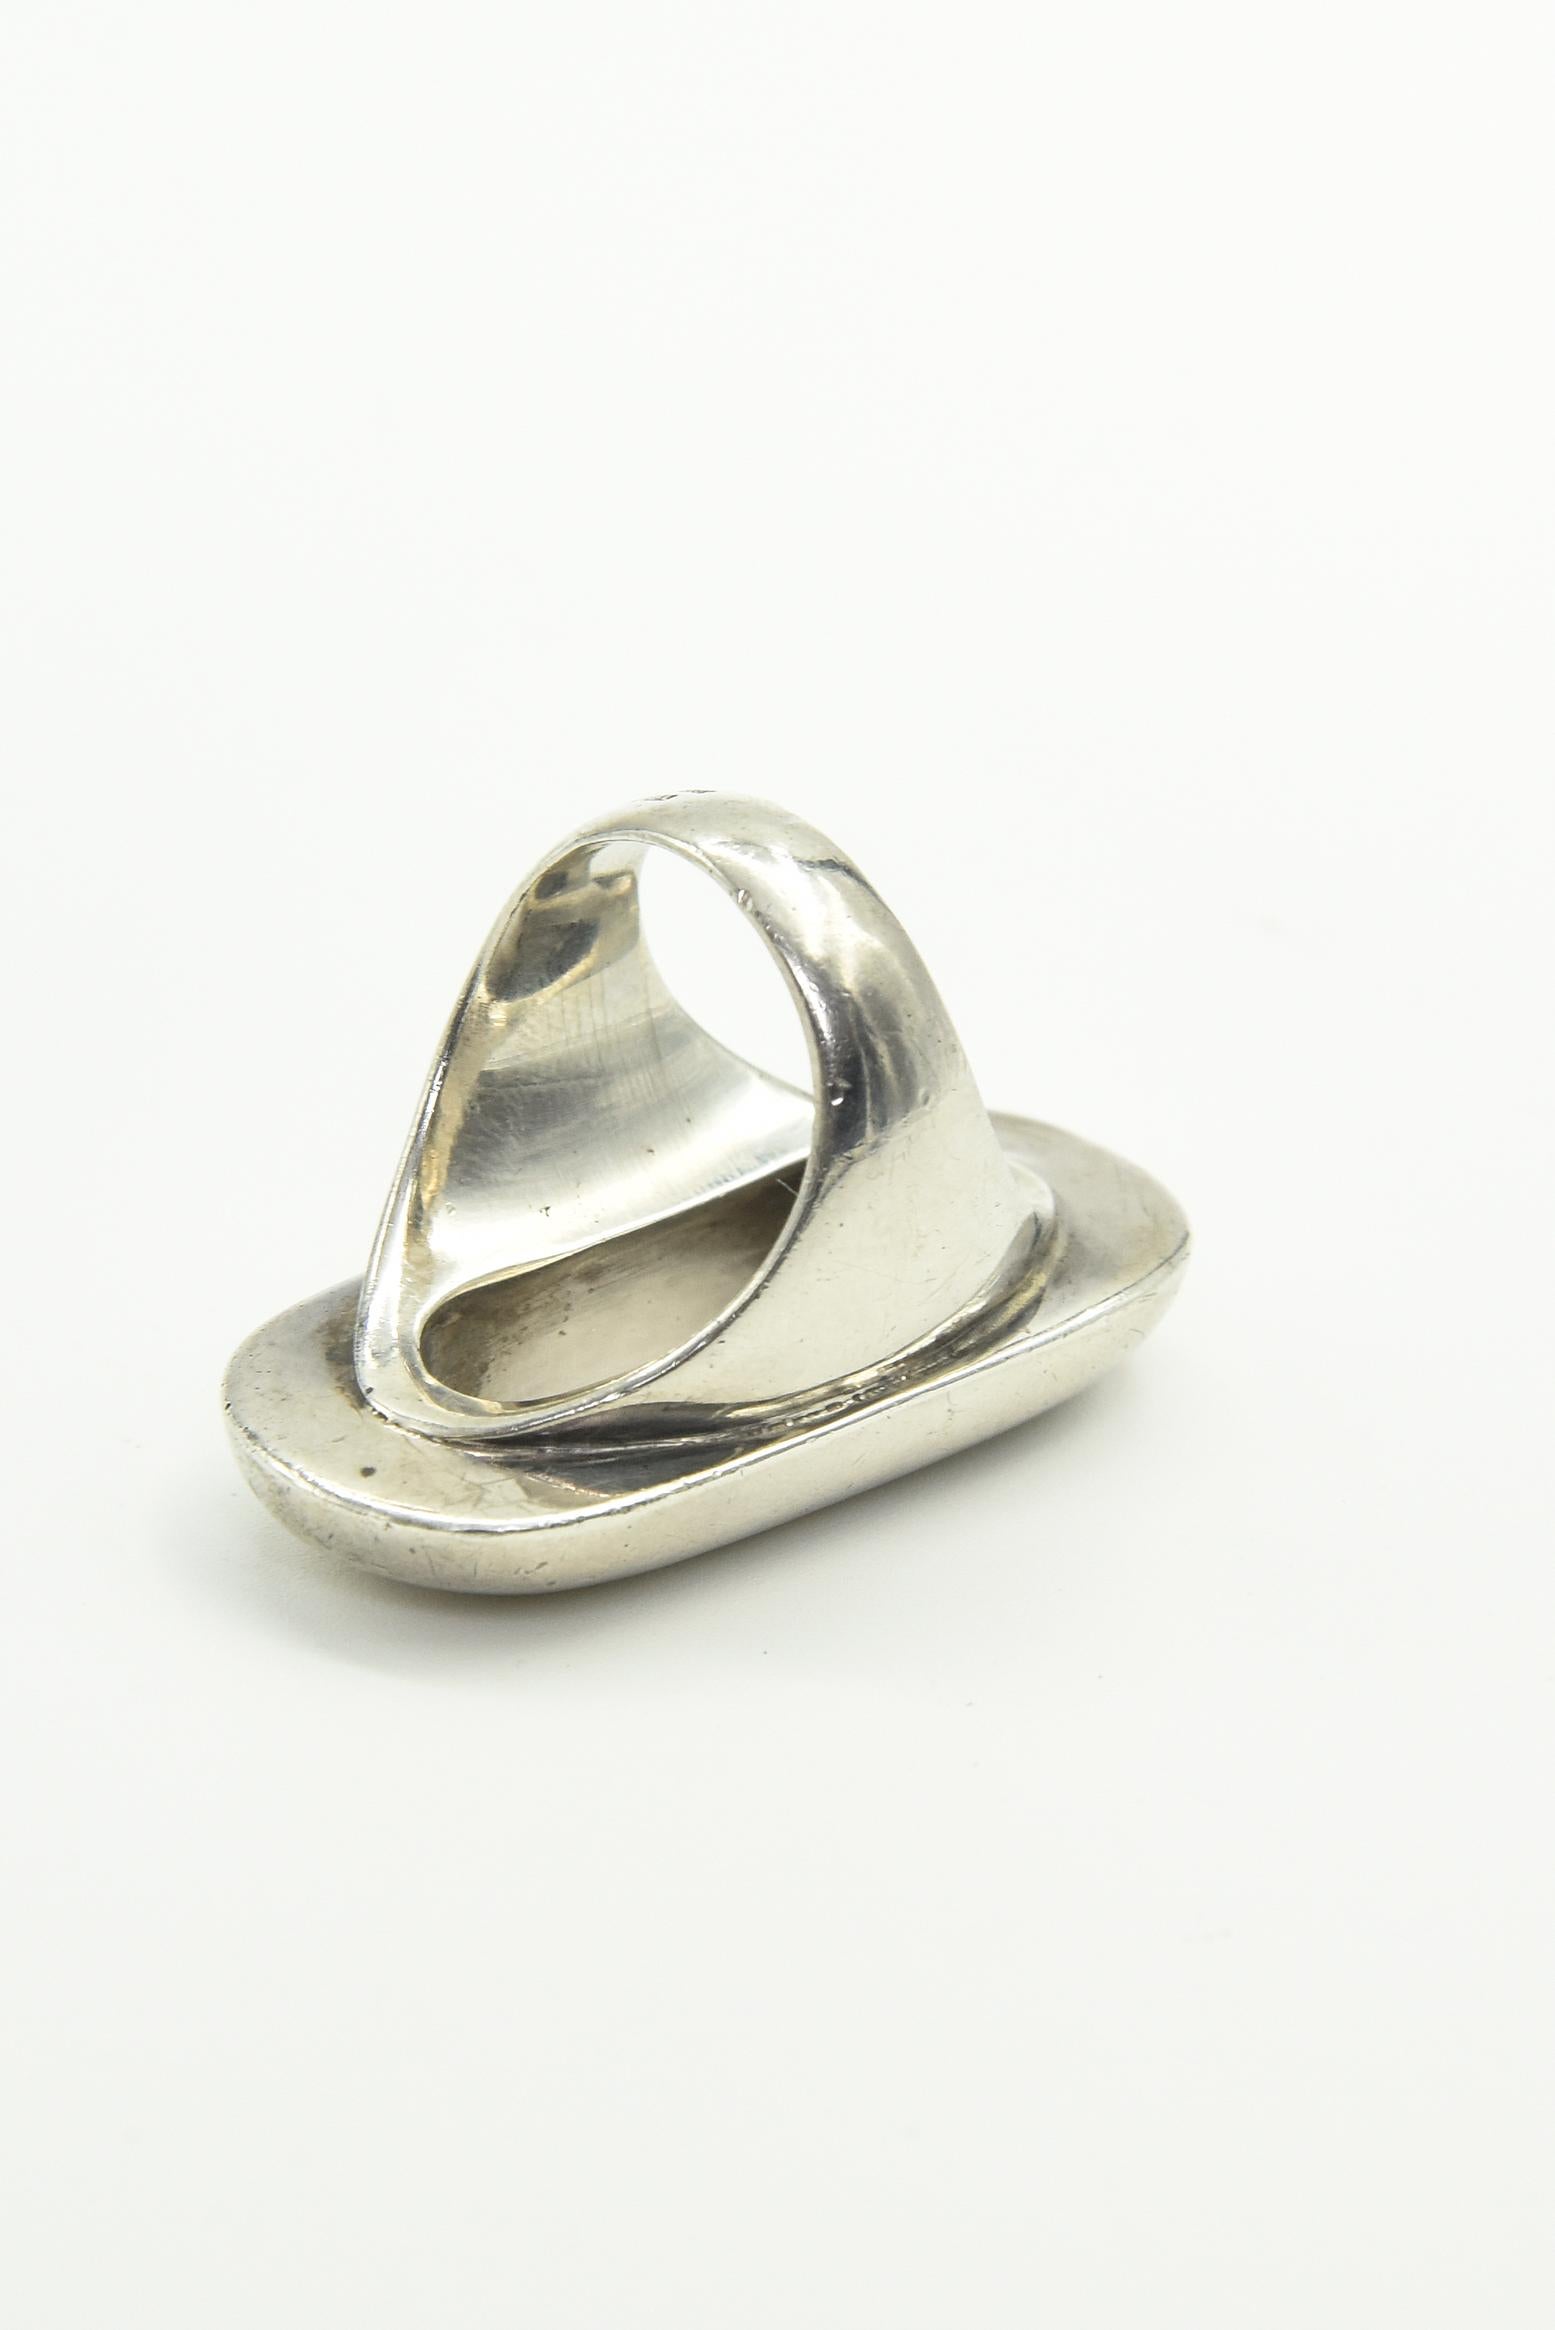 Modernest 1970s S'Paliu Sterling Silver Open Oval Ring 4